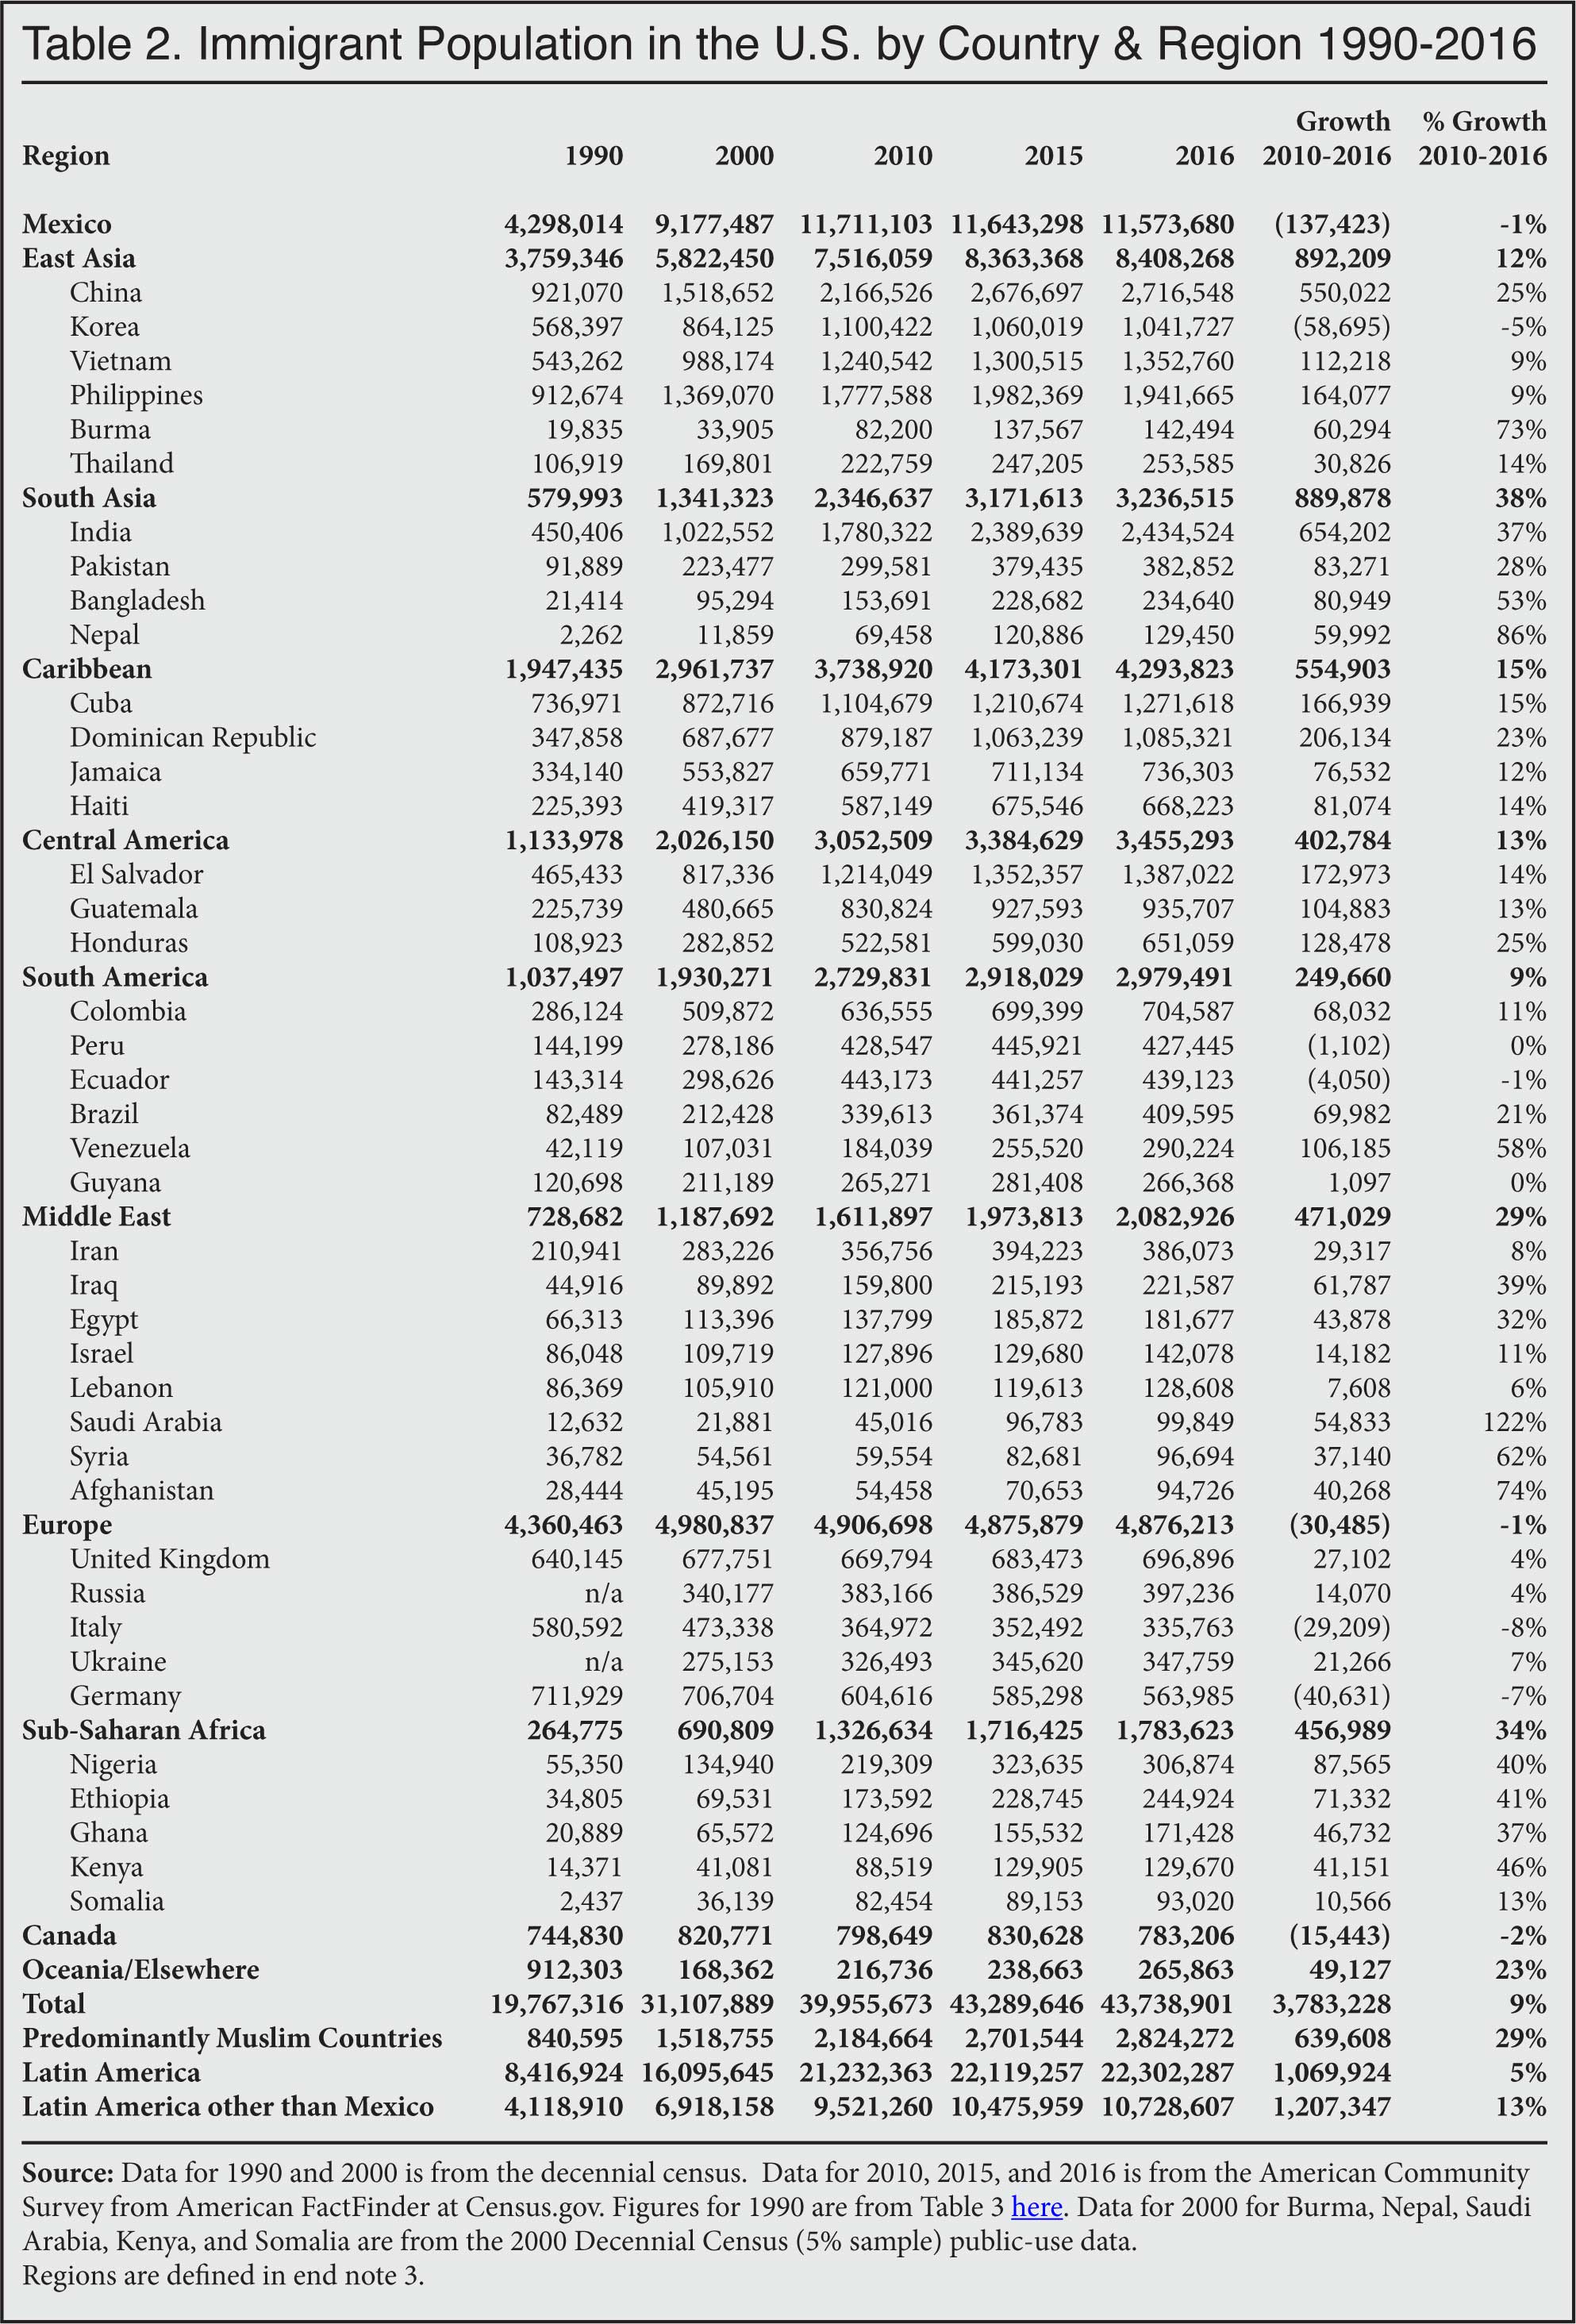 Table: Immigrant population in the US by country and region 1990-2016